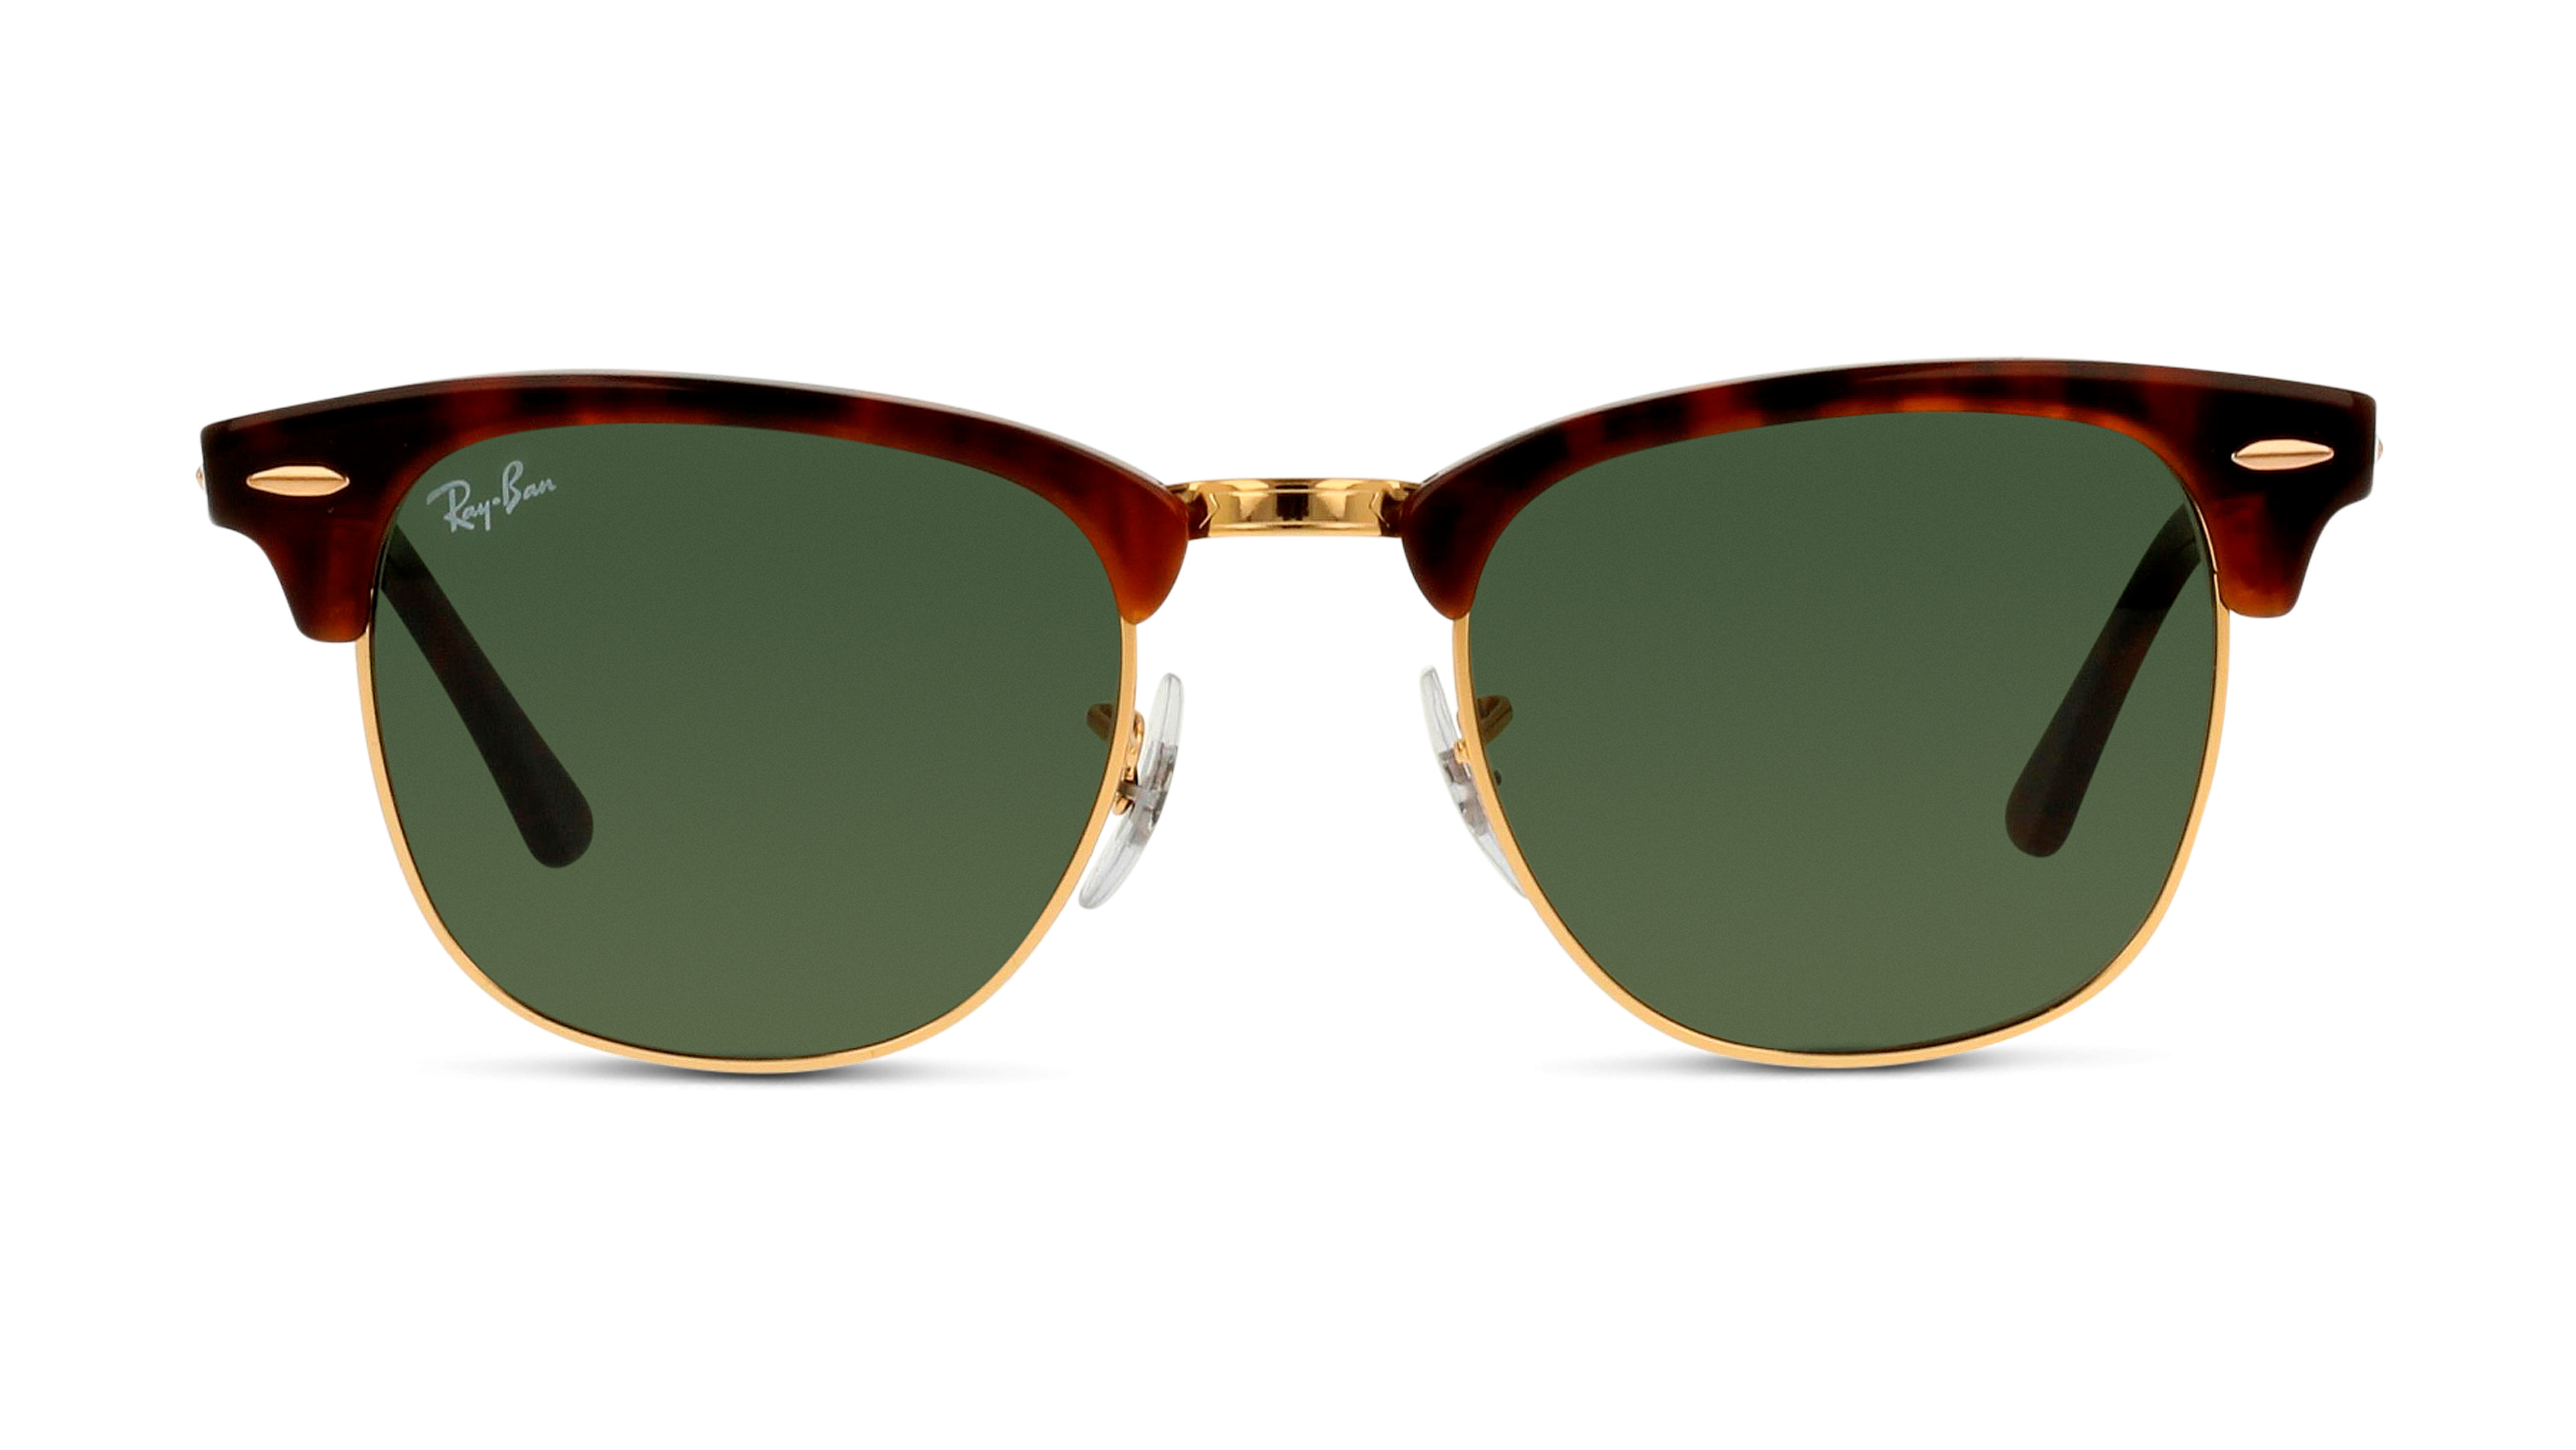 [products.image.front] Ray-Ban Clubmaster 0RB3016 W0366 Sonnenbrille